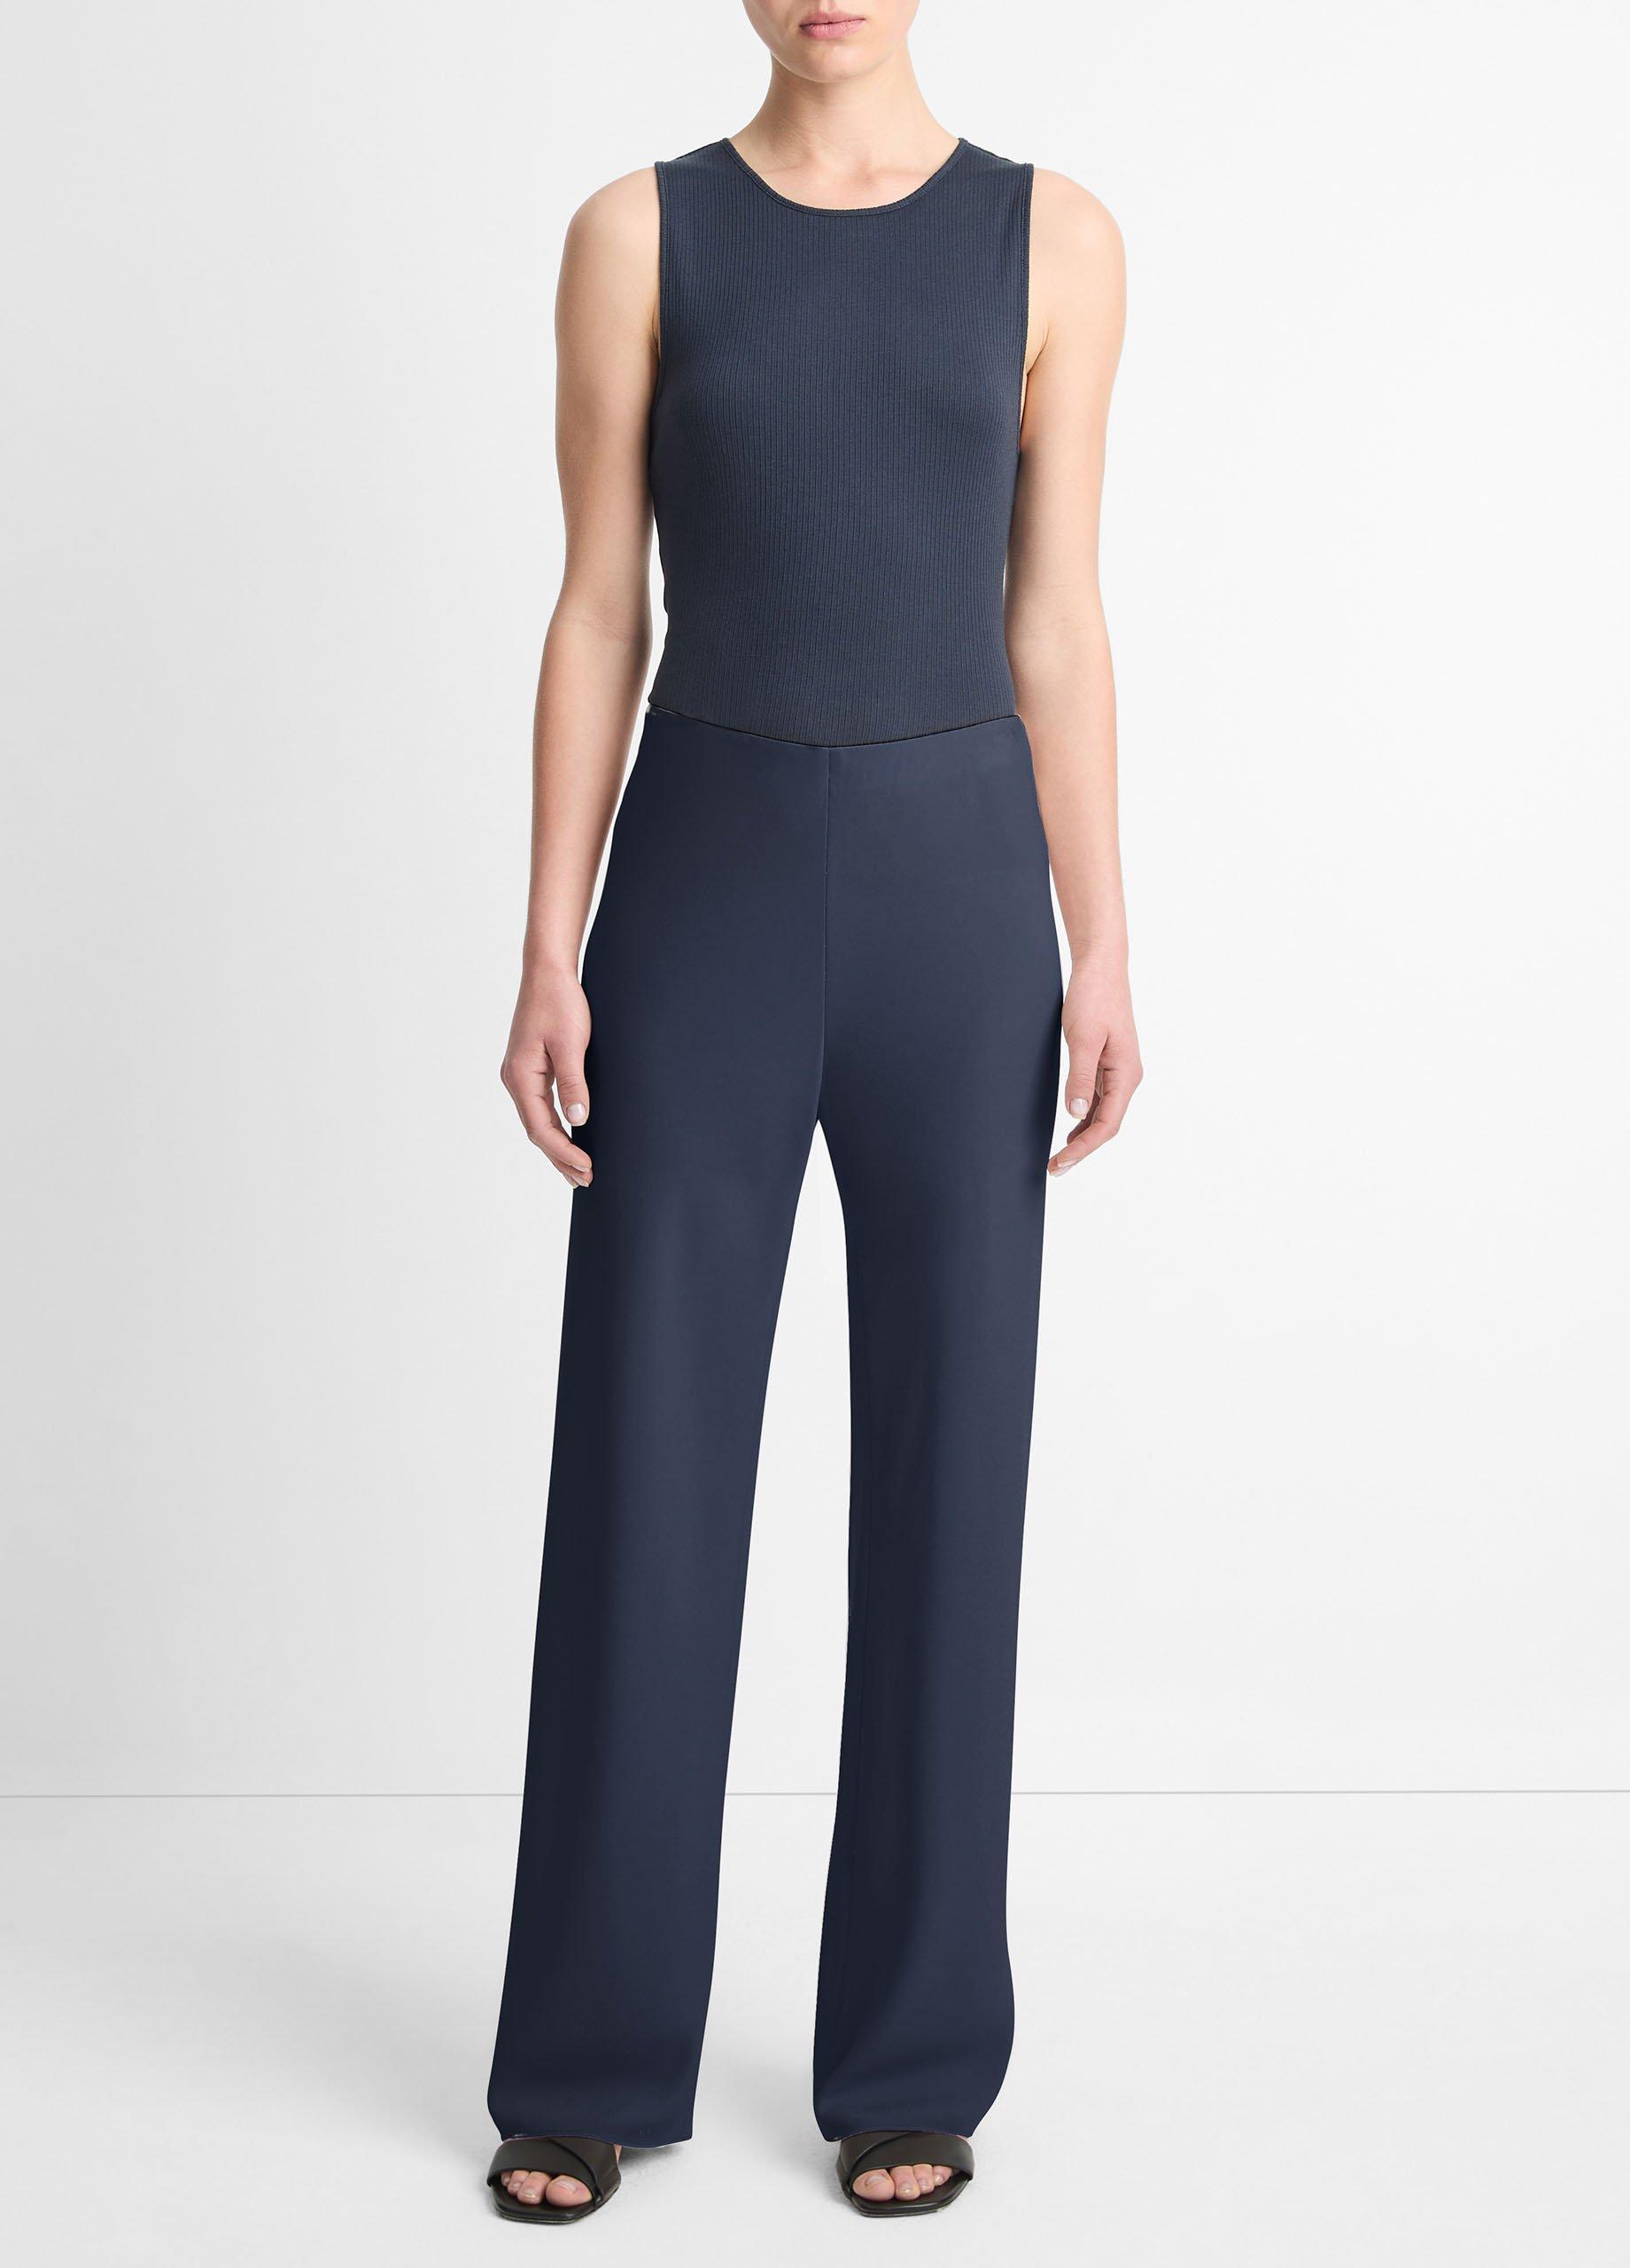 High-Waist Bias Pant in Vince Products | Vince